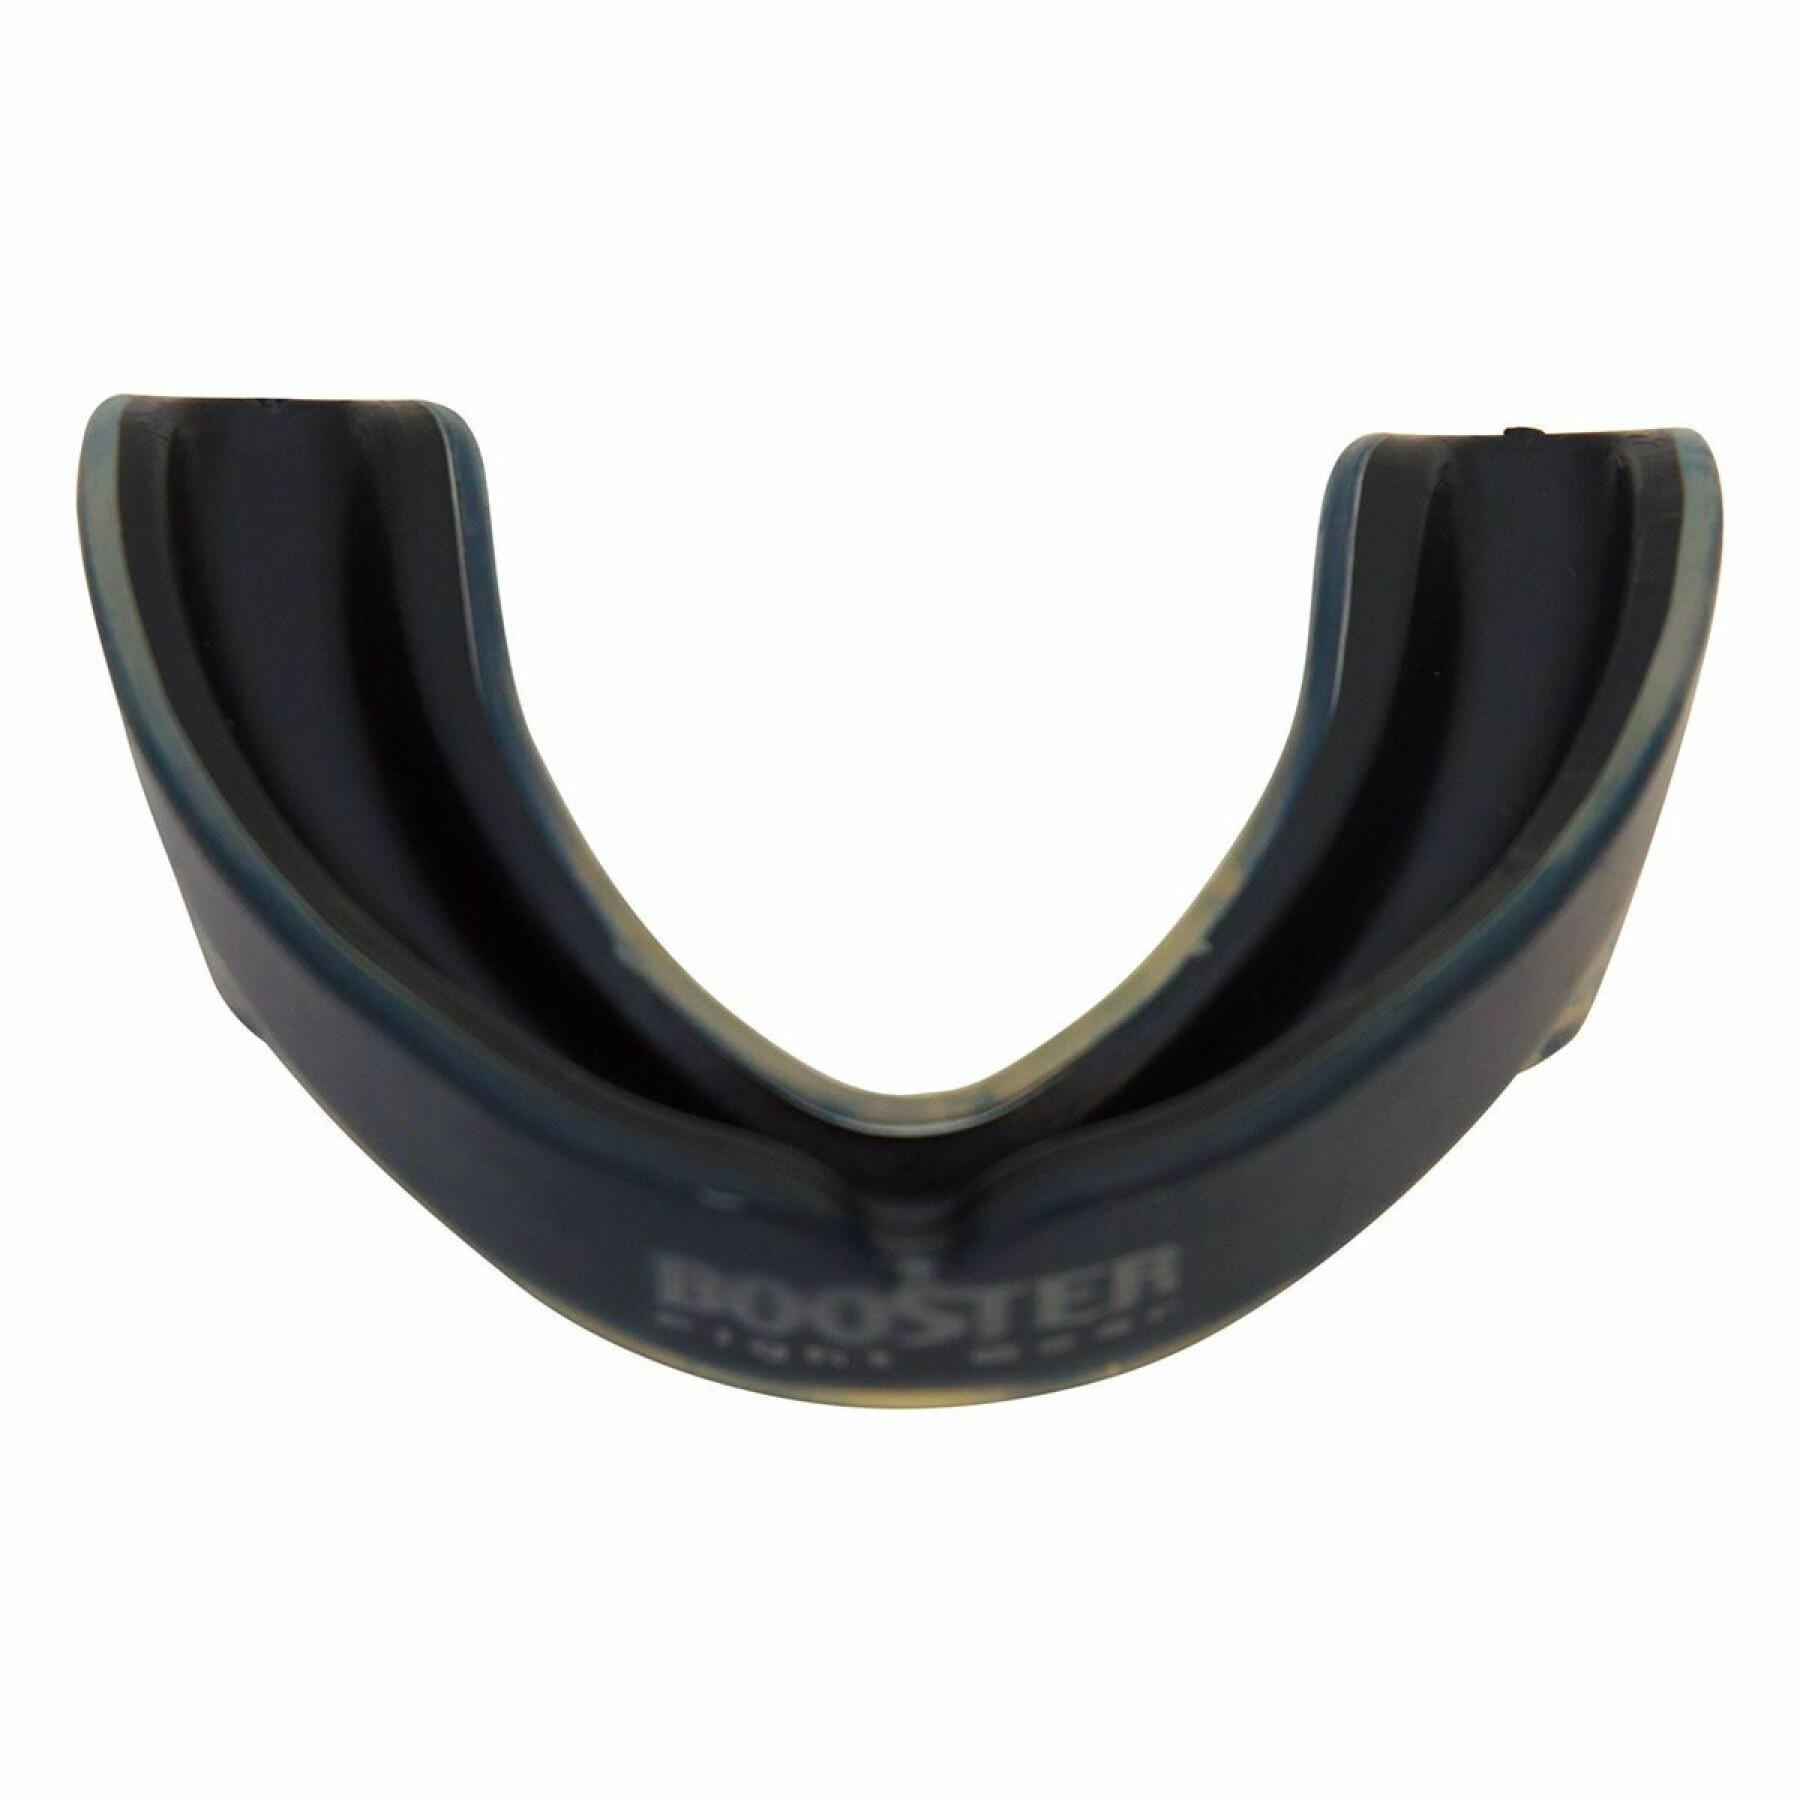 Mouthguards Booster Fight Gear Mg Pro